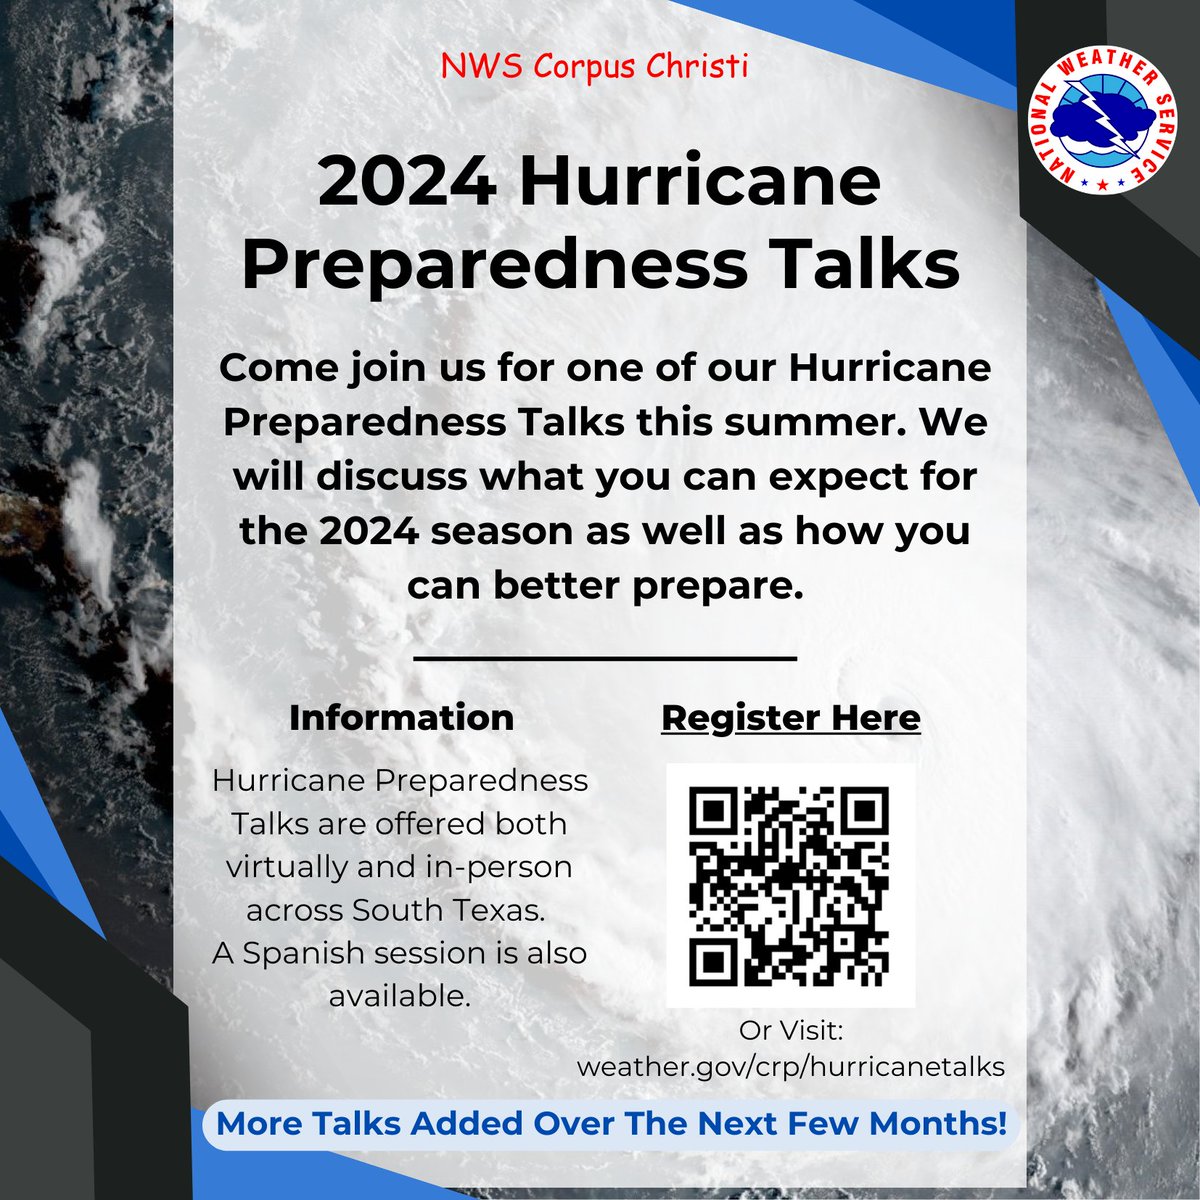 It's that time of the year. Come join us for one of our Hurricane Preparedness Talks this summer. We plan on adding additional talks over the next few months so continue to check back to see which date works for you! Register Here: weather.gov/crp/hurricanet…